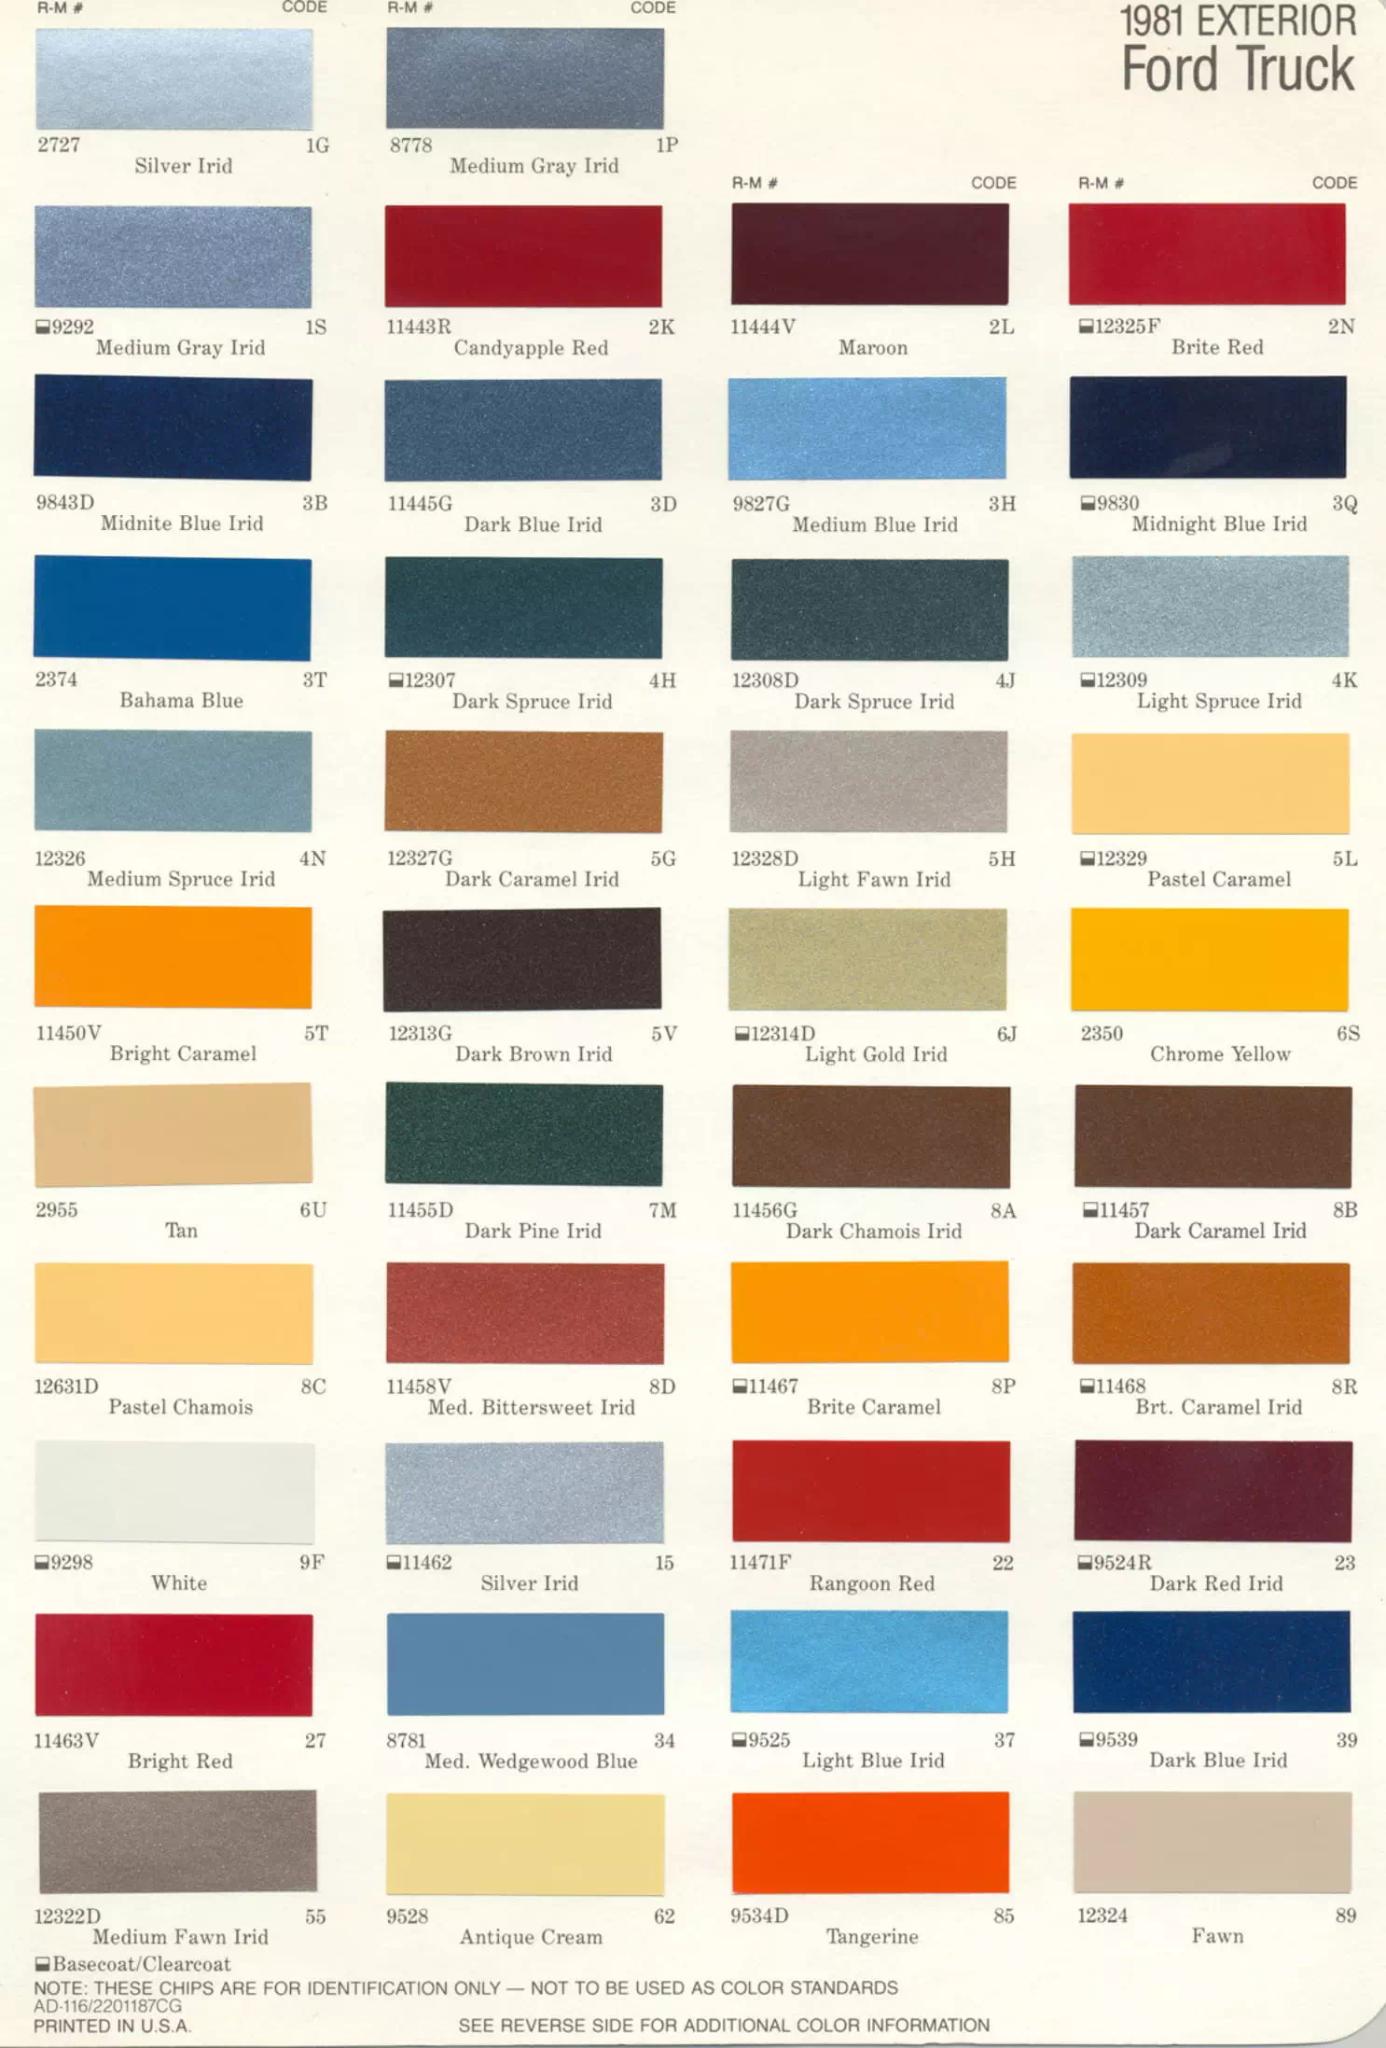 Paint Codes and Color examples used on Ford Motor Company Vehicles in 1981